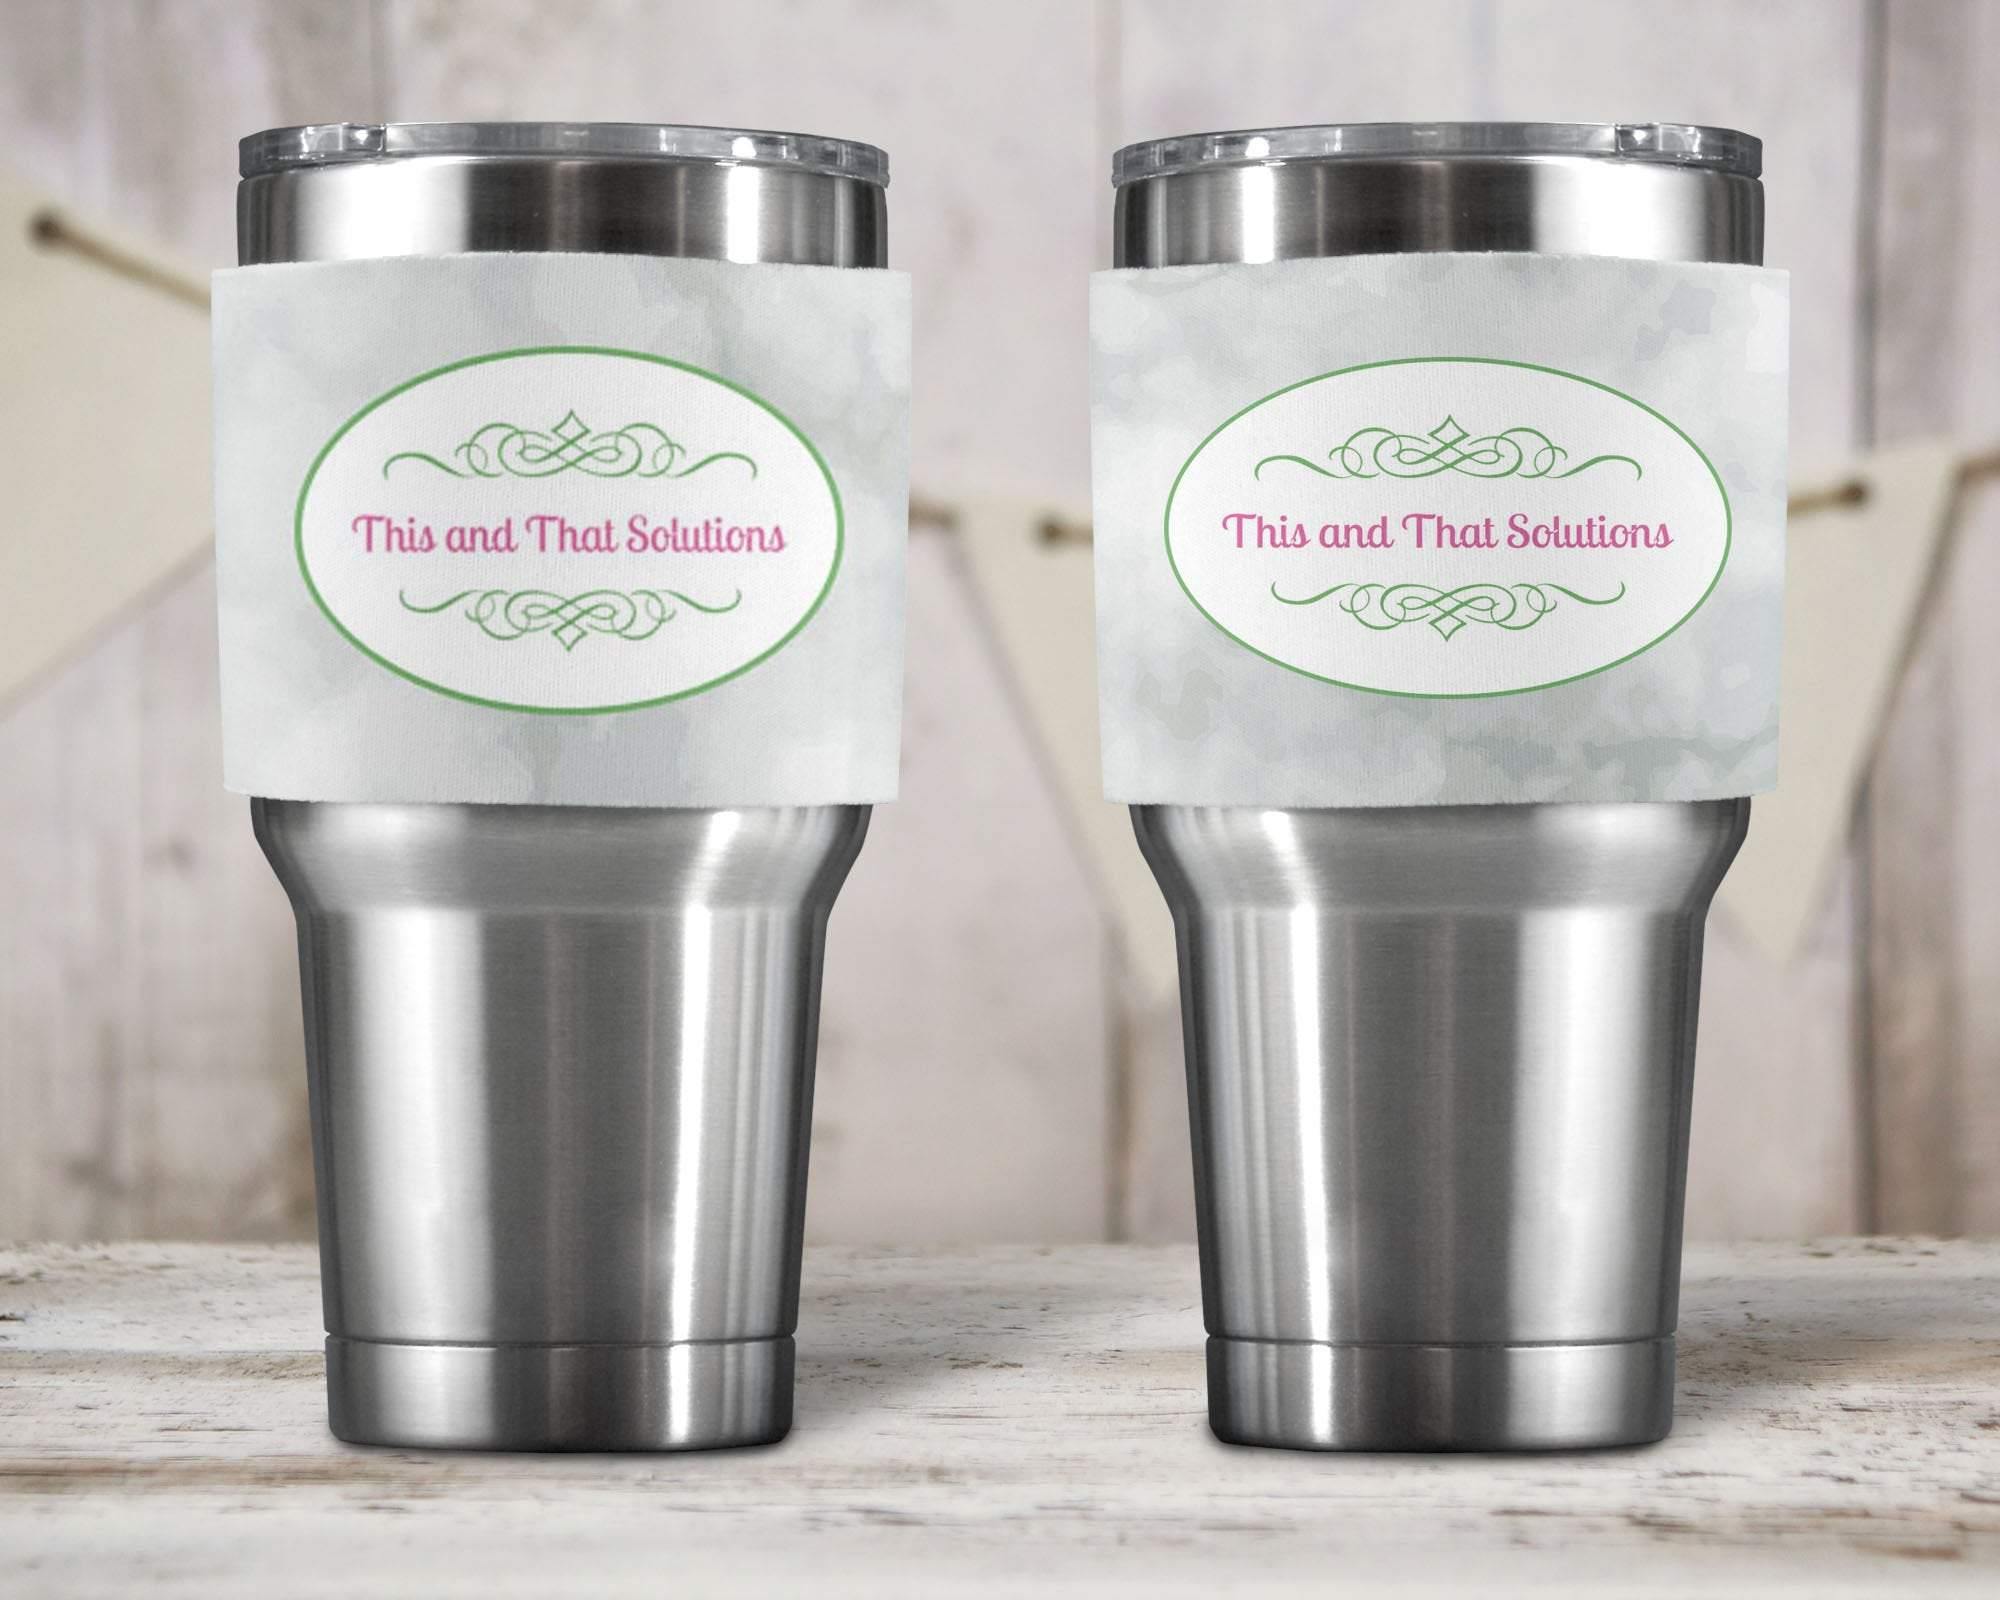 Personalized Yeti Wraps | Custom Yeti Accessories | Company Logo - This & That Solutions - Personalized Yeti Wraps | Custom Yeti Accessories | Company Logo - Personalized Gifts & Custom Home Decor